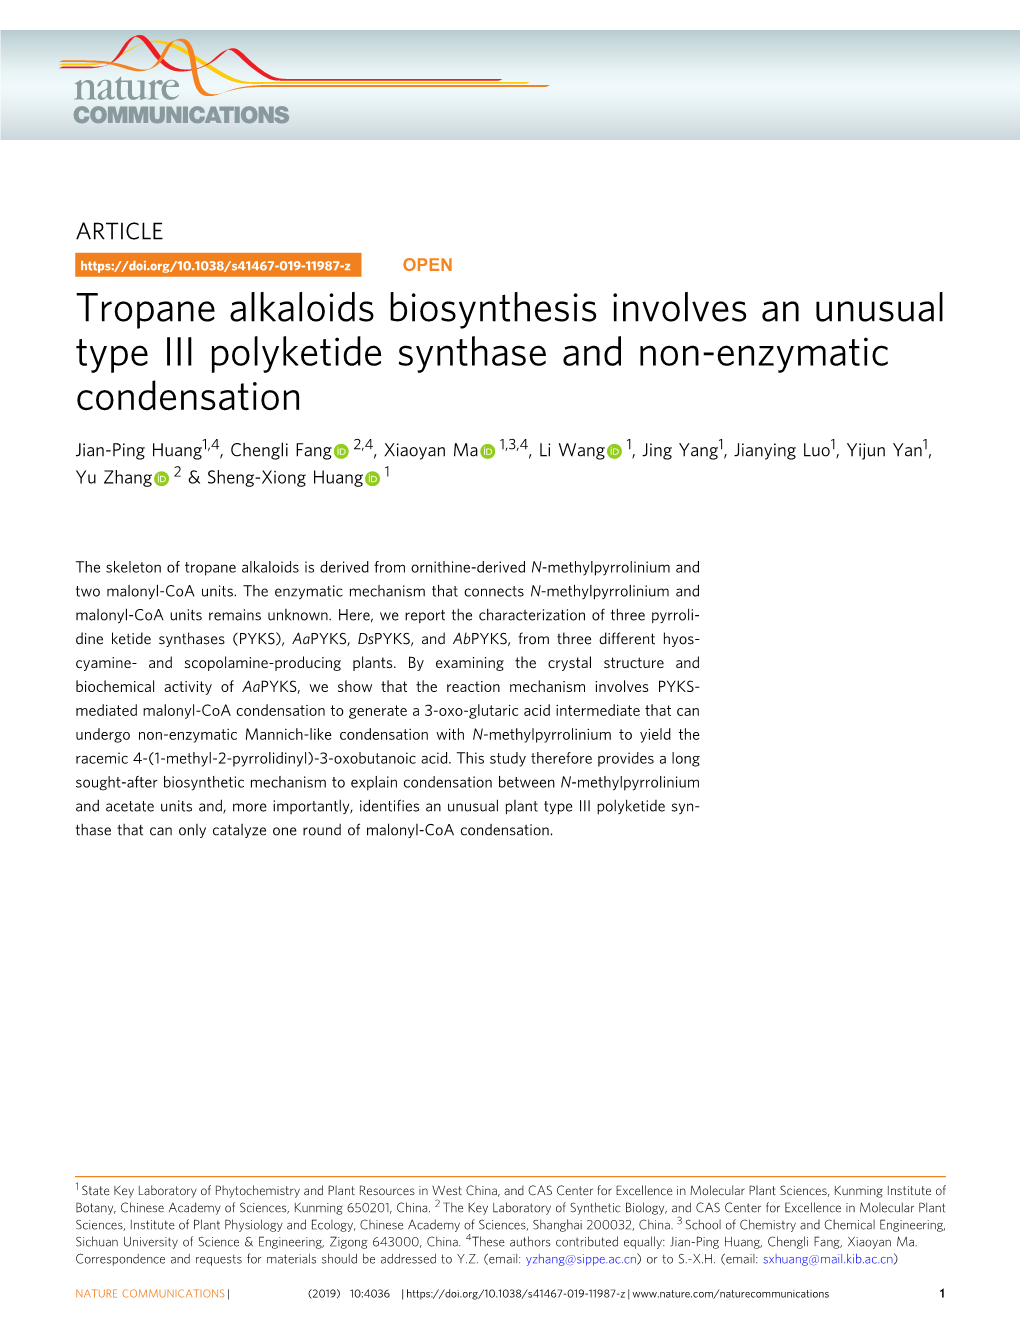 Tropane Alkaloids Biosynthesis Involves an Unusual Type III Polyketide Synthase and Non-Enzymatic Condensation